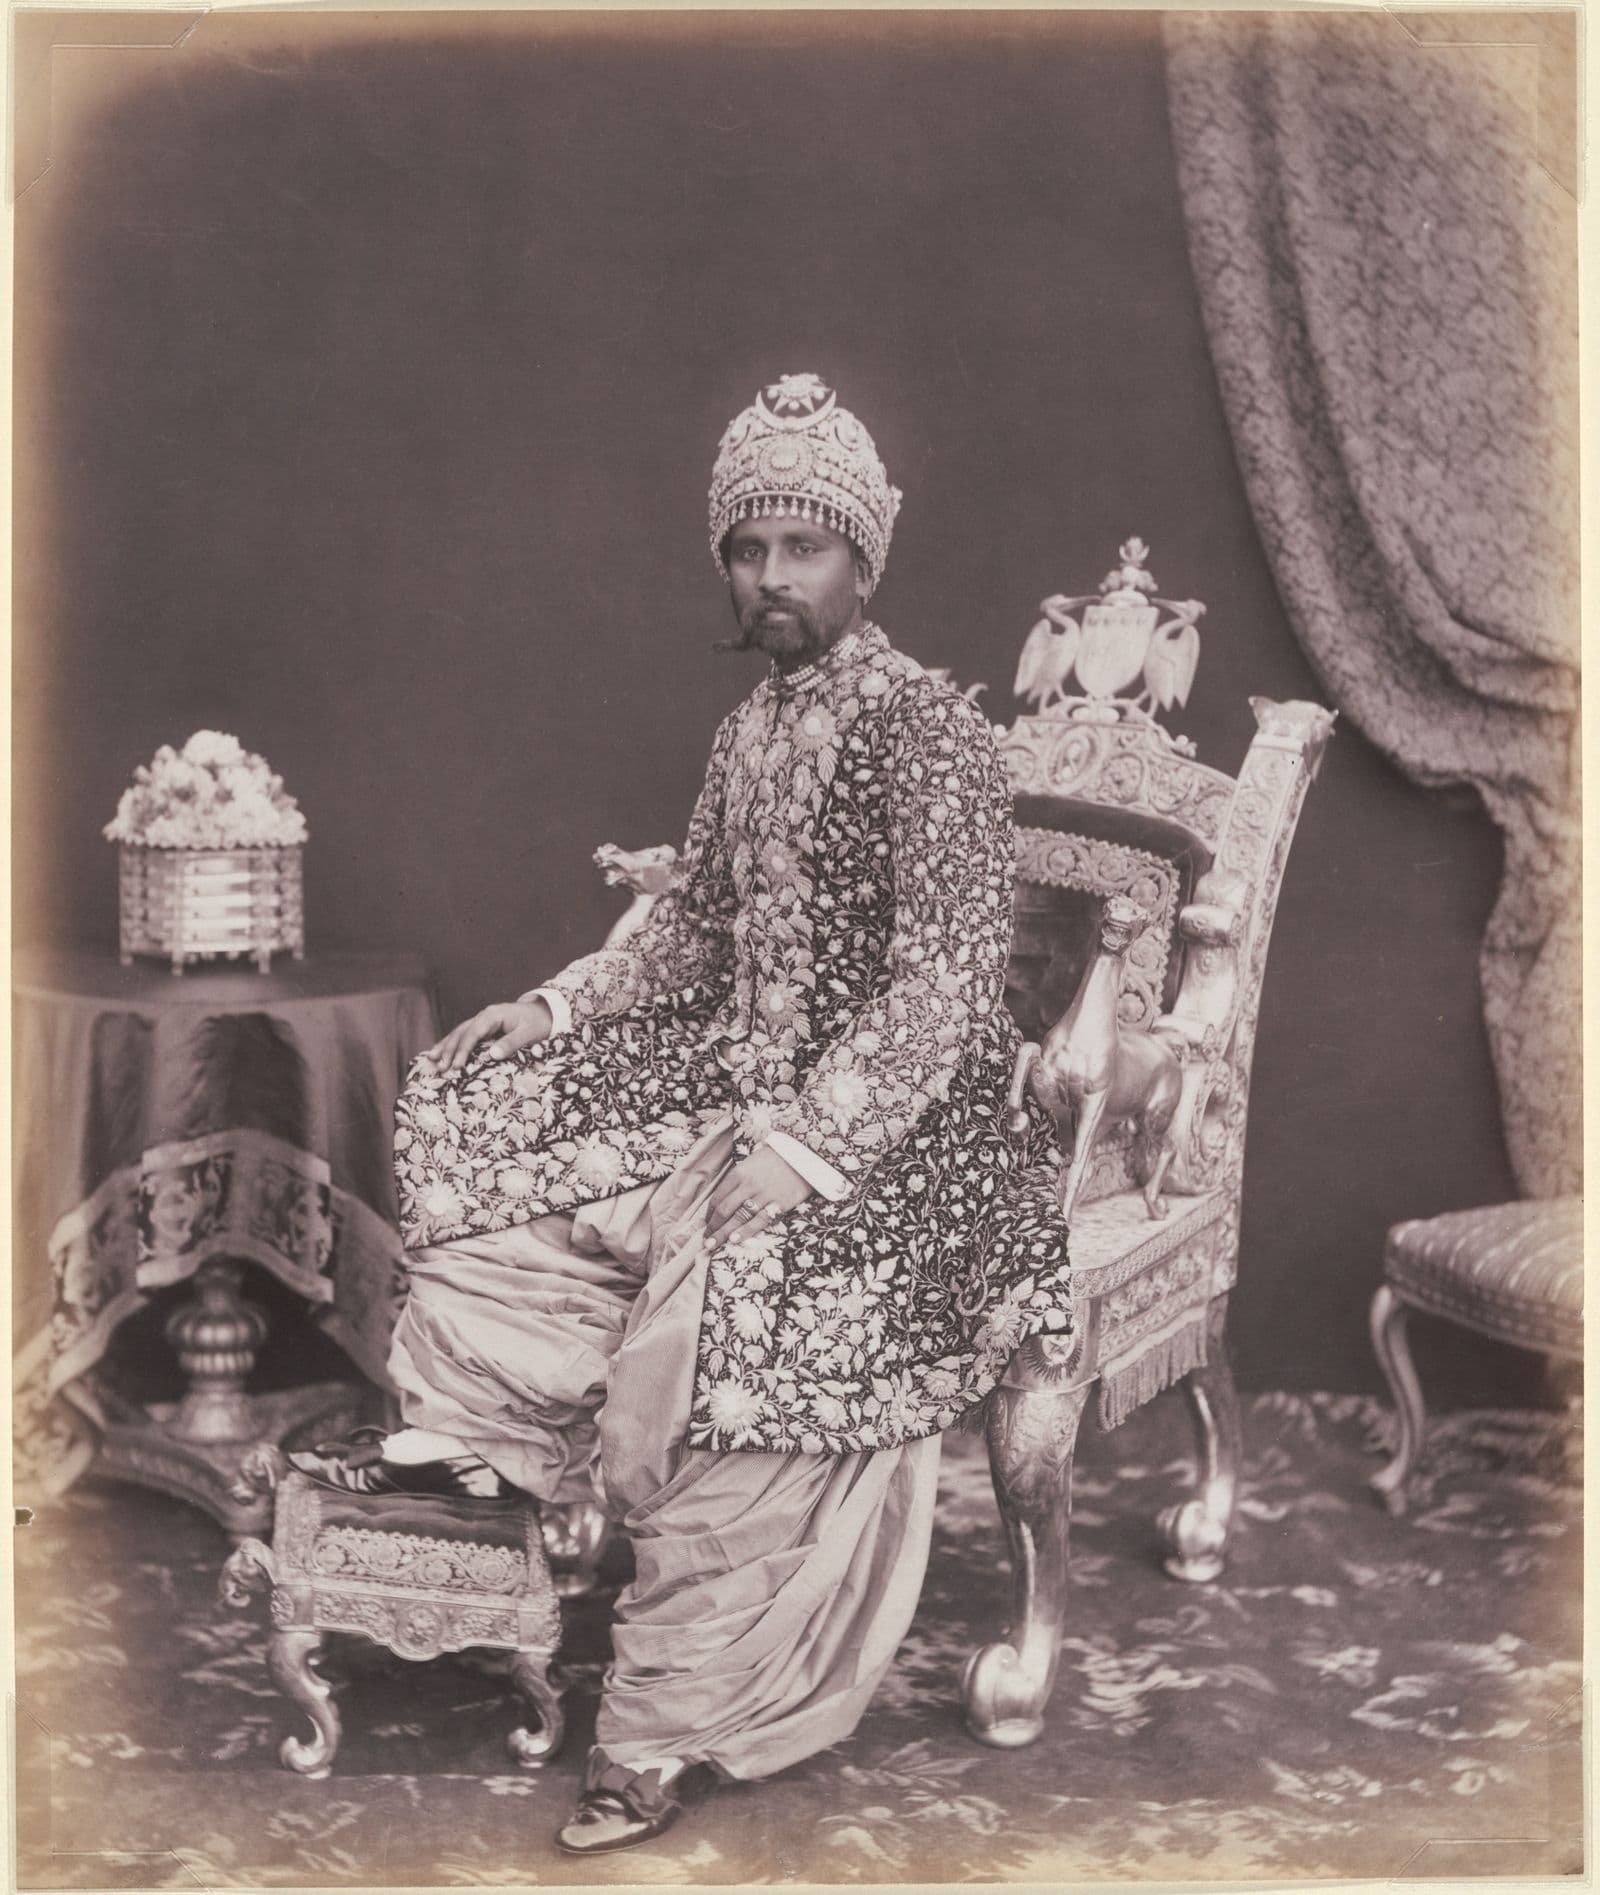 Black and white photograph of seated man in ornate clothing and crown